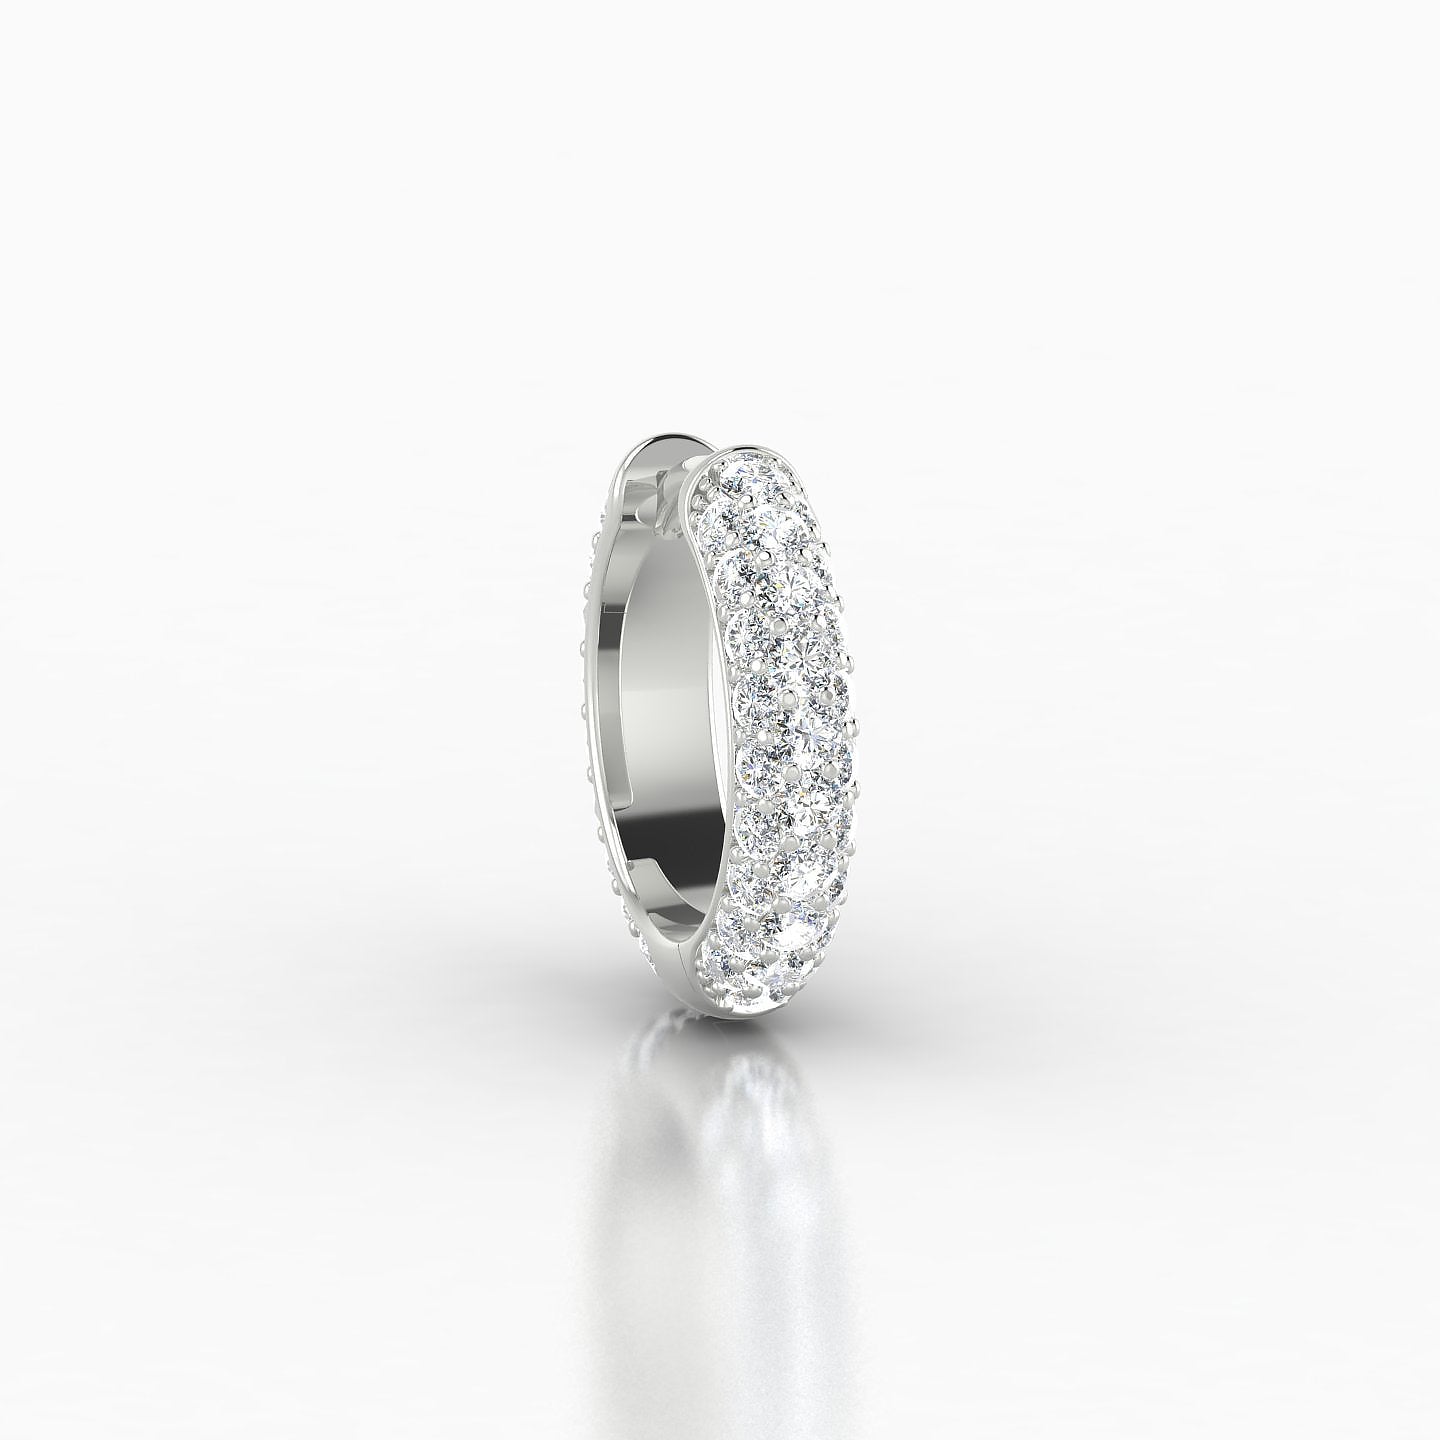 Theia | 18k White Gold 8 mm Pave Diamond Nose Ring Piercing